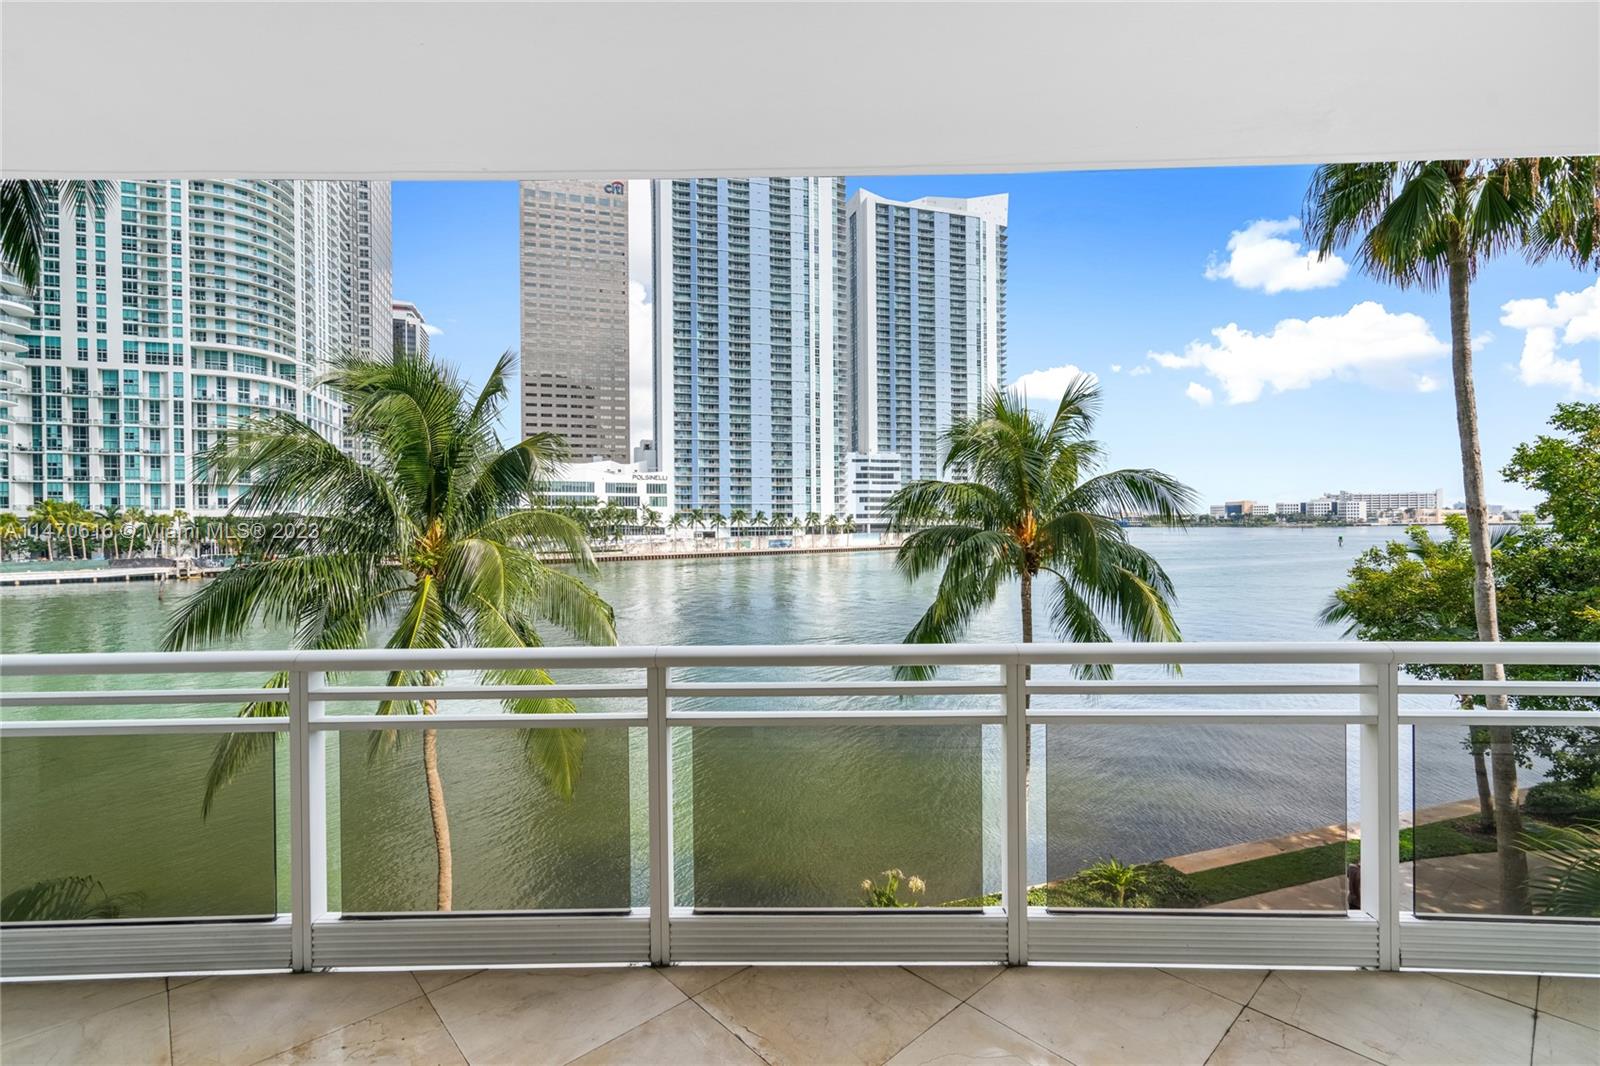 This gorgeous 2-bedroom, 2.5-bathroom waterfront unit is up for sale in the esteemed Carbonell building situated on Brickell Key. The unit boasts stunning direct views of the Miami River and a beautiful terrace that offers breathtaking views of the bay and the city skyline. The modern and inviting atmosphere is created by the open concept design with contemporary touches. The building offers an array of top-notch amenities, including a state-of-the-art fitness center, racquetball, tennis and squash courts, 24-hour valet parking service and security, private pool, and more.